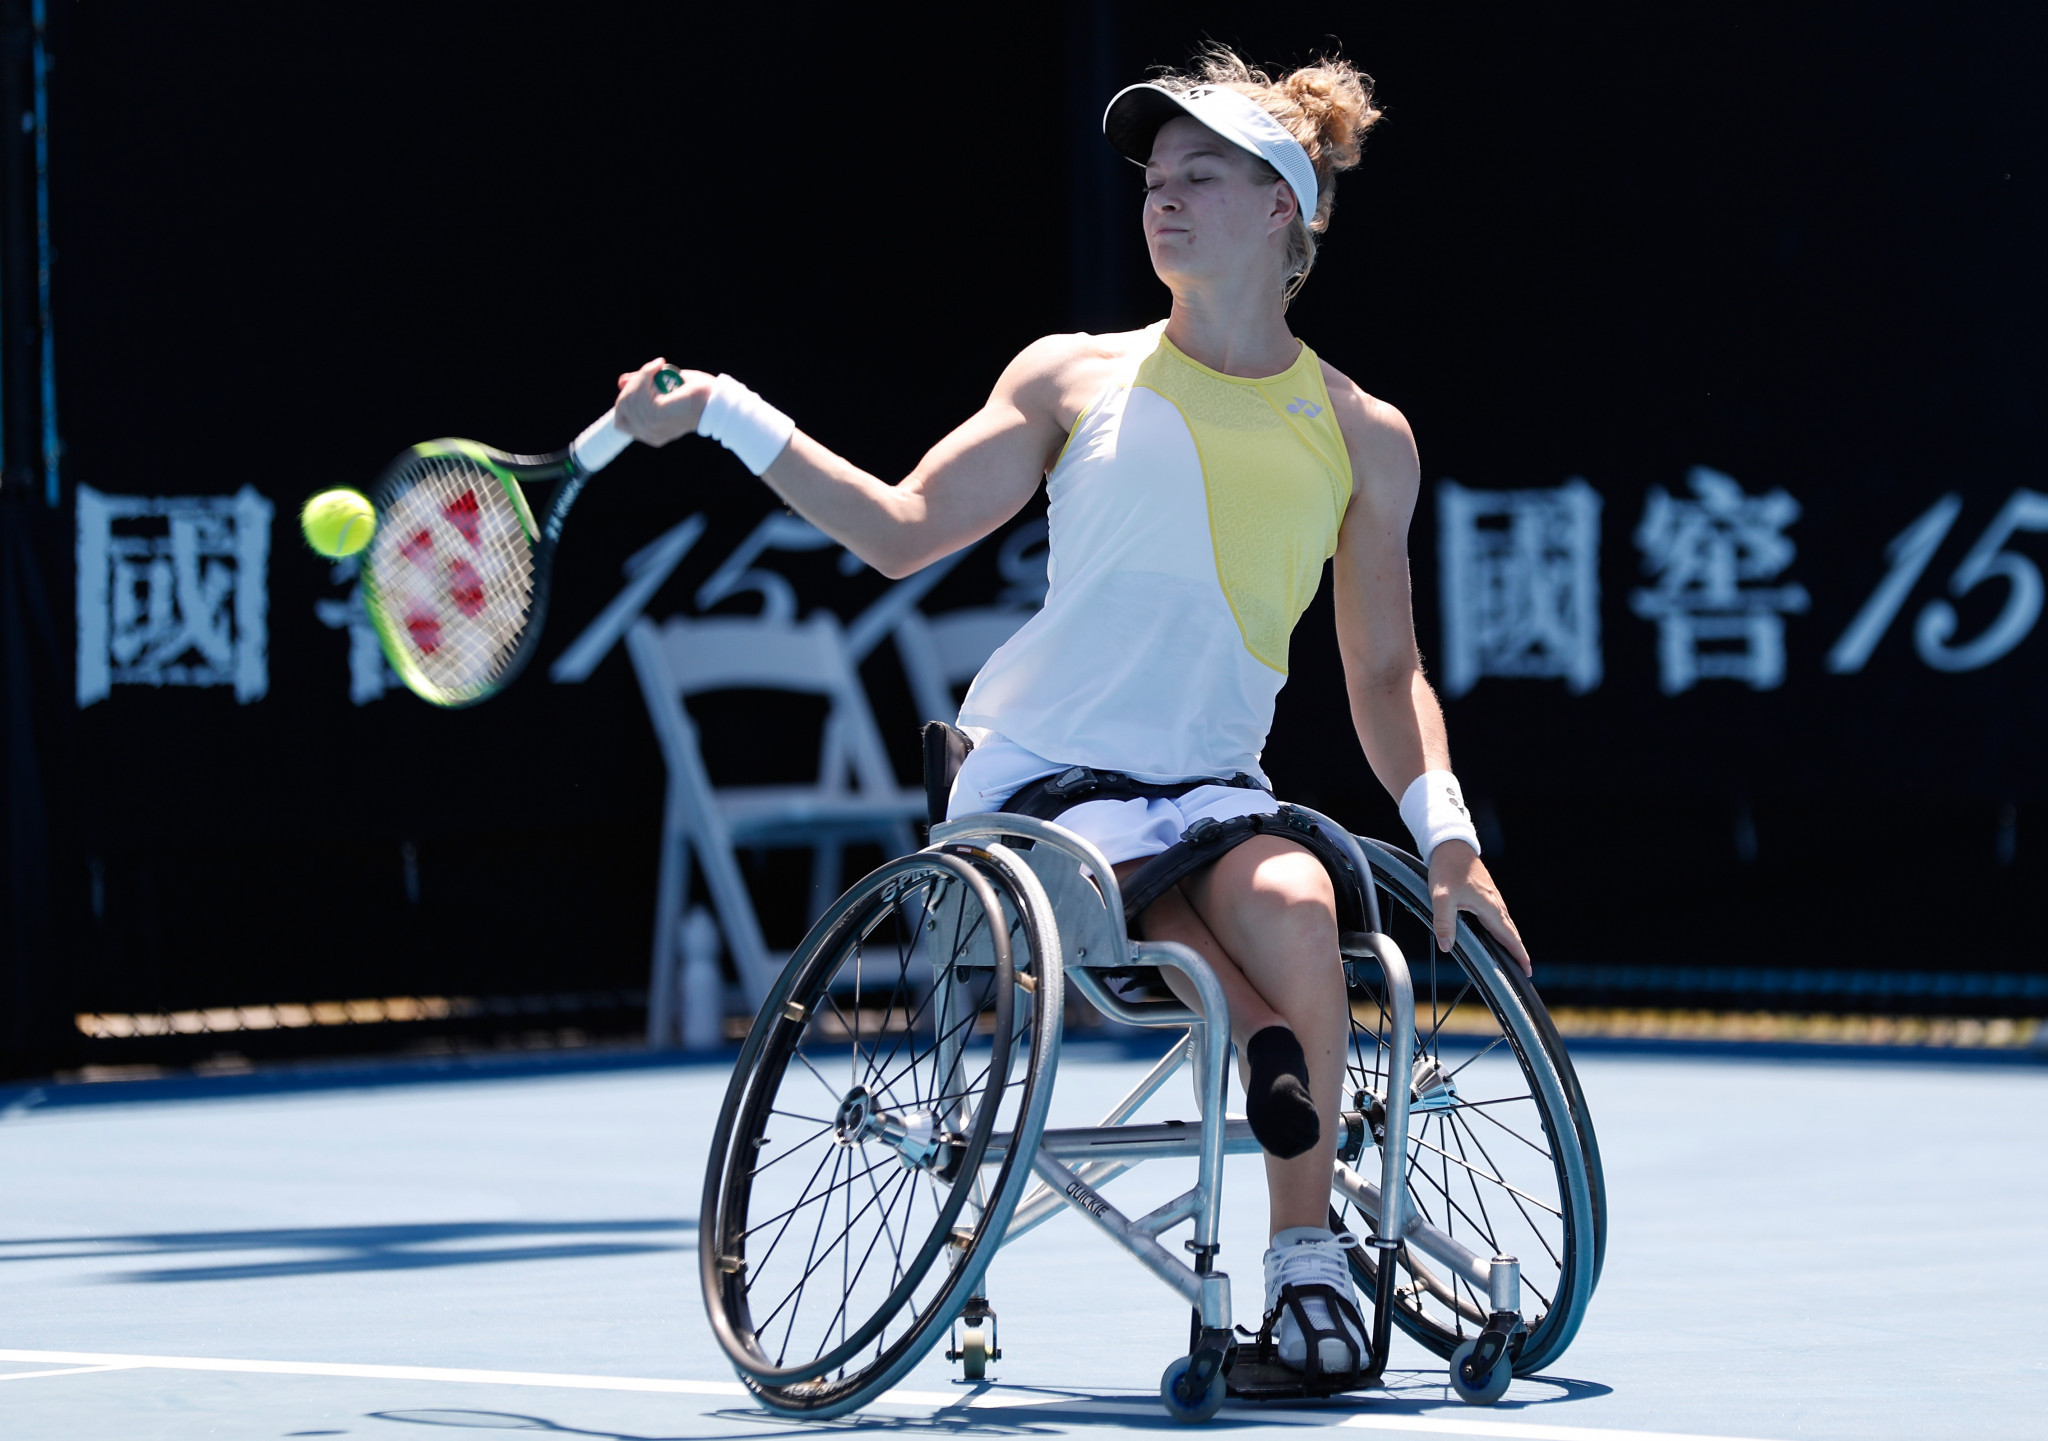 Dutch pair Diede de Groot and her partner Aneik Van Koot thrashed their semi-final opponents Japan's Yui Kamji and Italy's Giulia Capocci to reach the women's wheelchair doubles final ©Getty Images